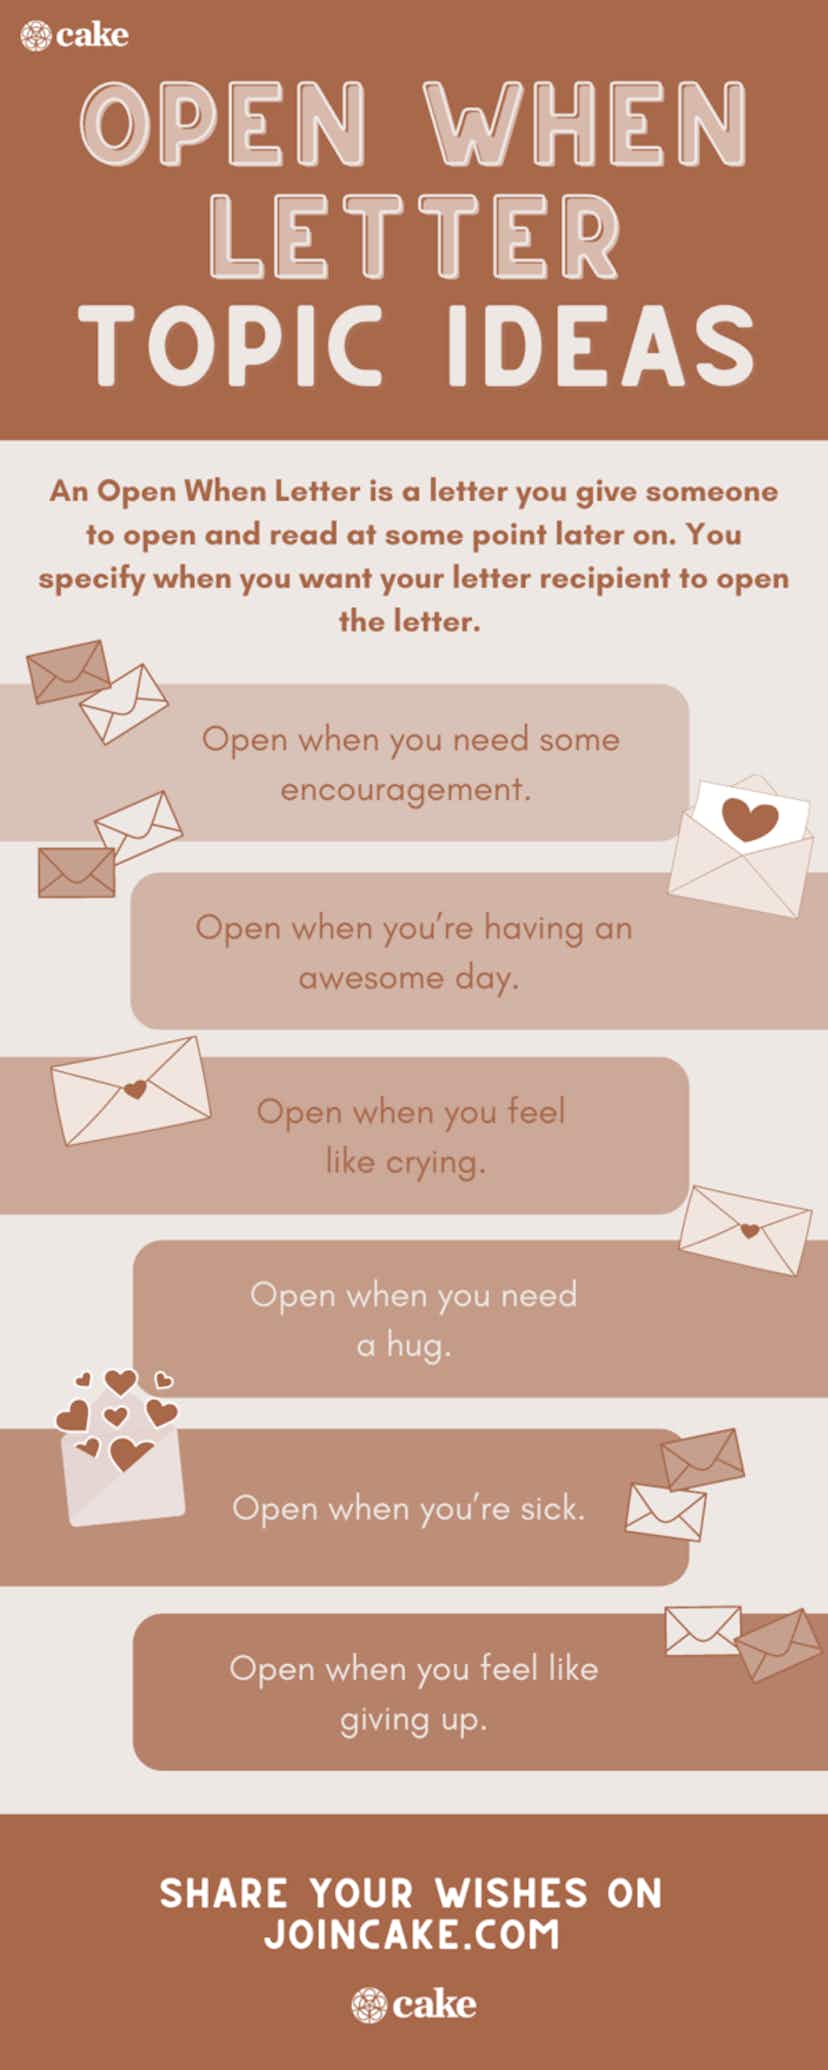 infographic of topic ideas for open when letters